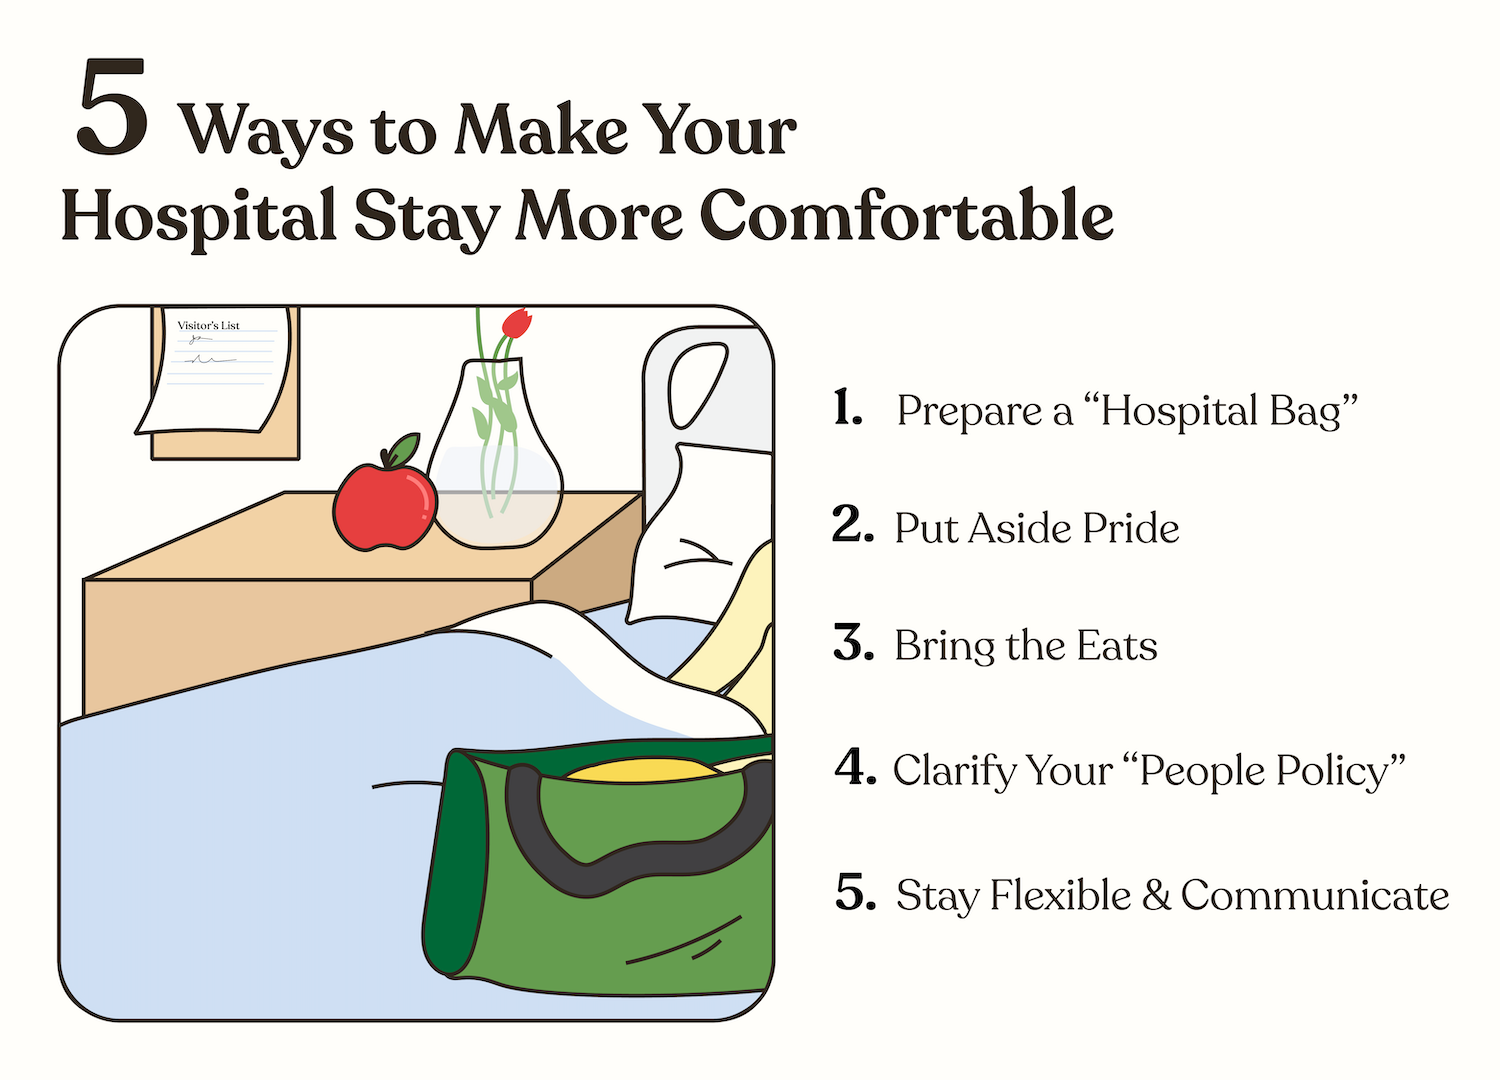 A list of 5 ways to make your hospital stay more comfortable beside a graphic showing a hospital bed, travel bag, and an apple